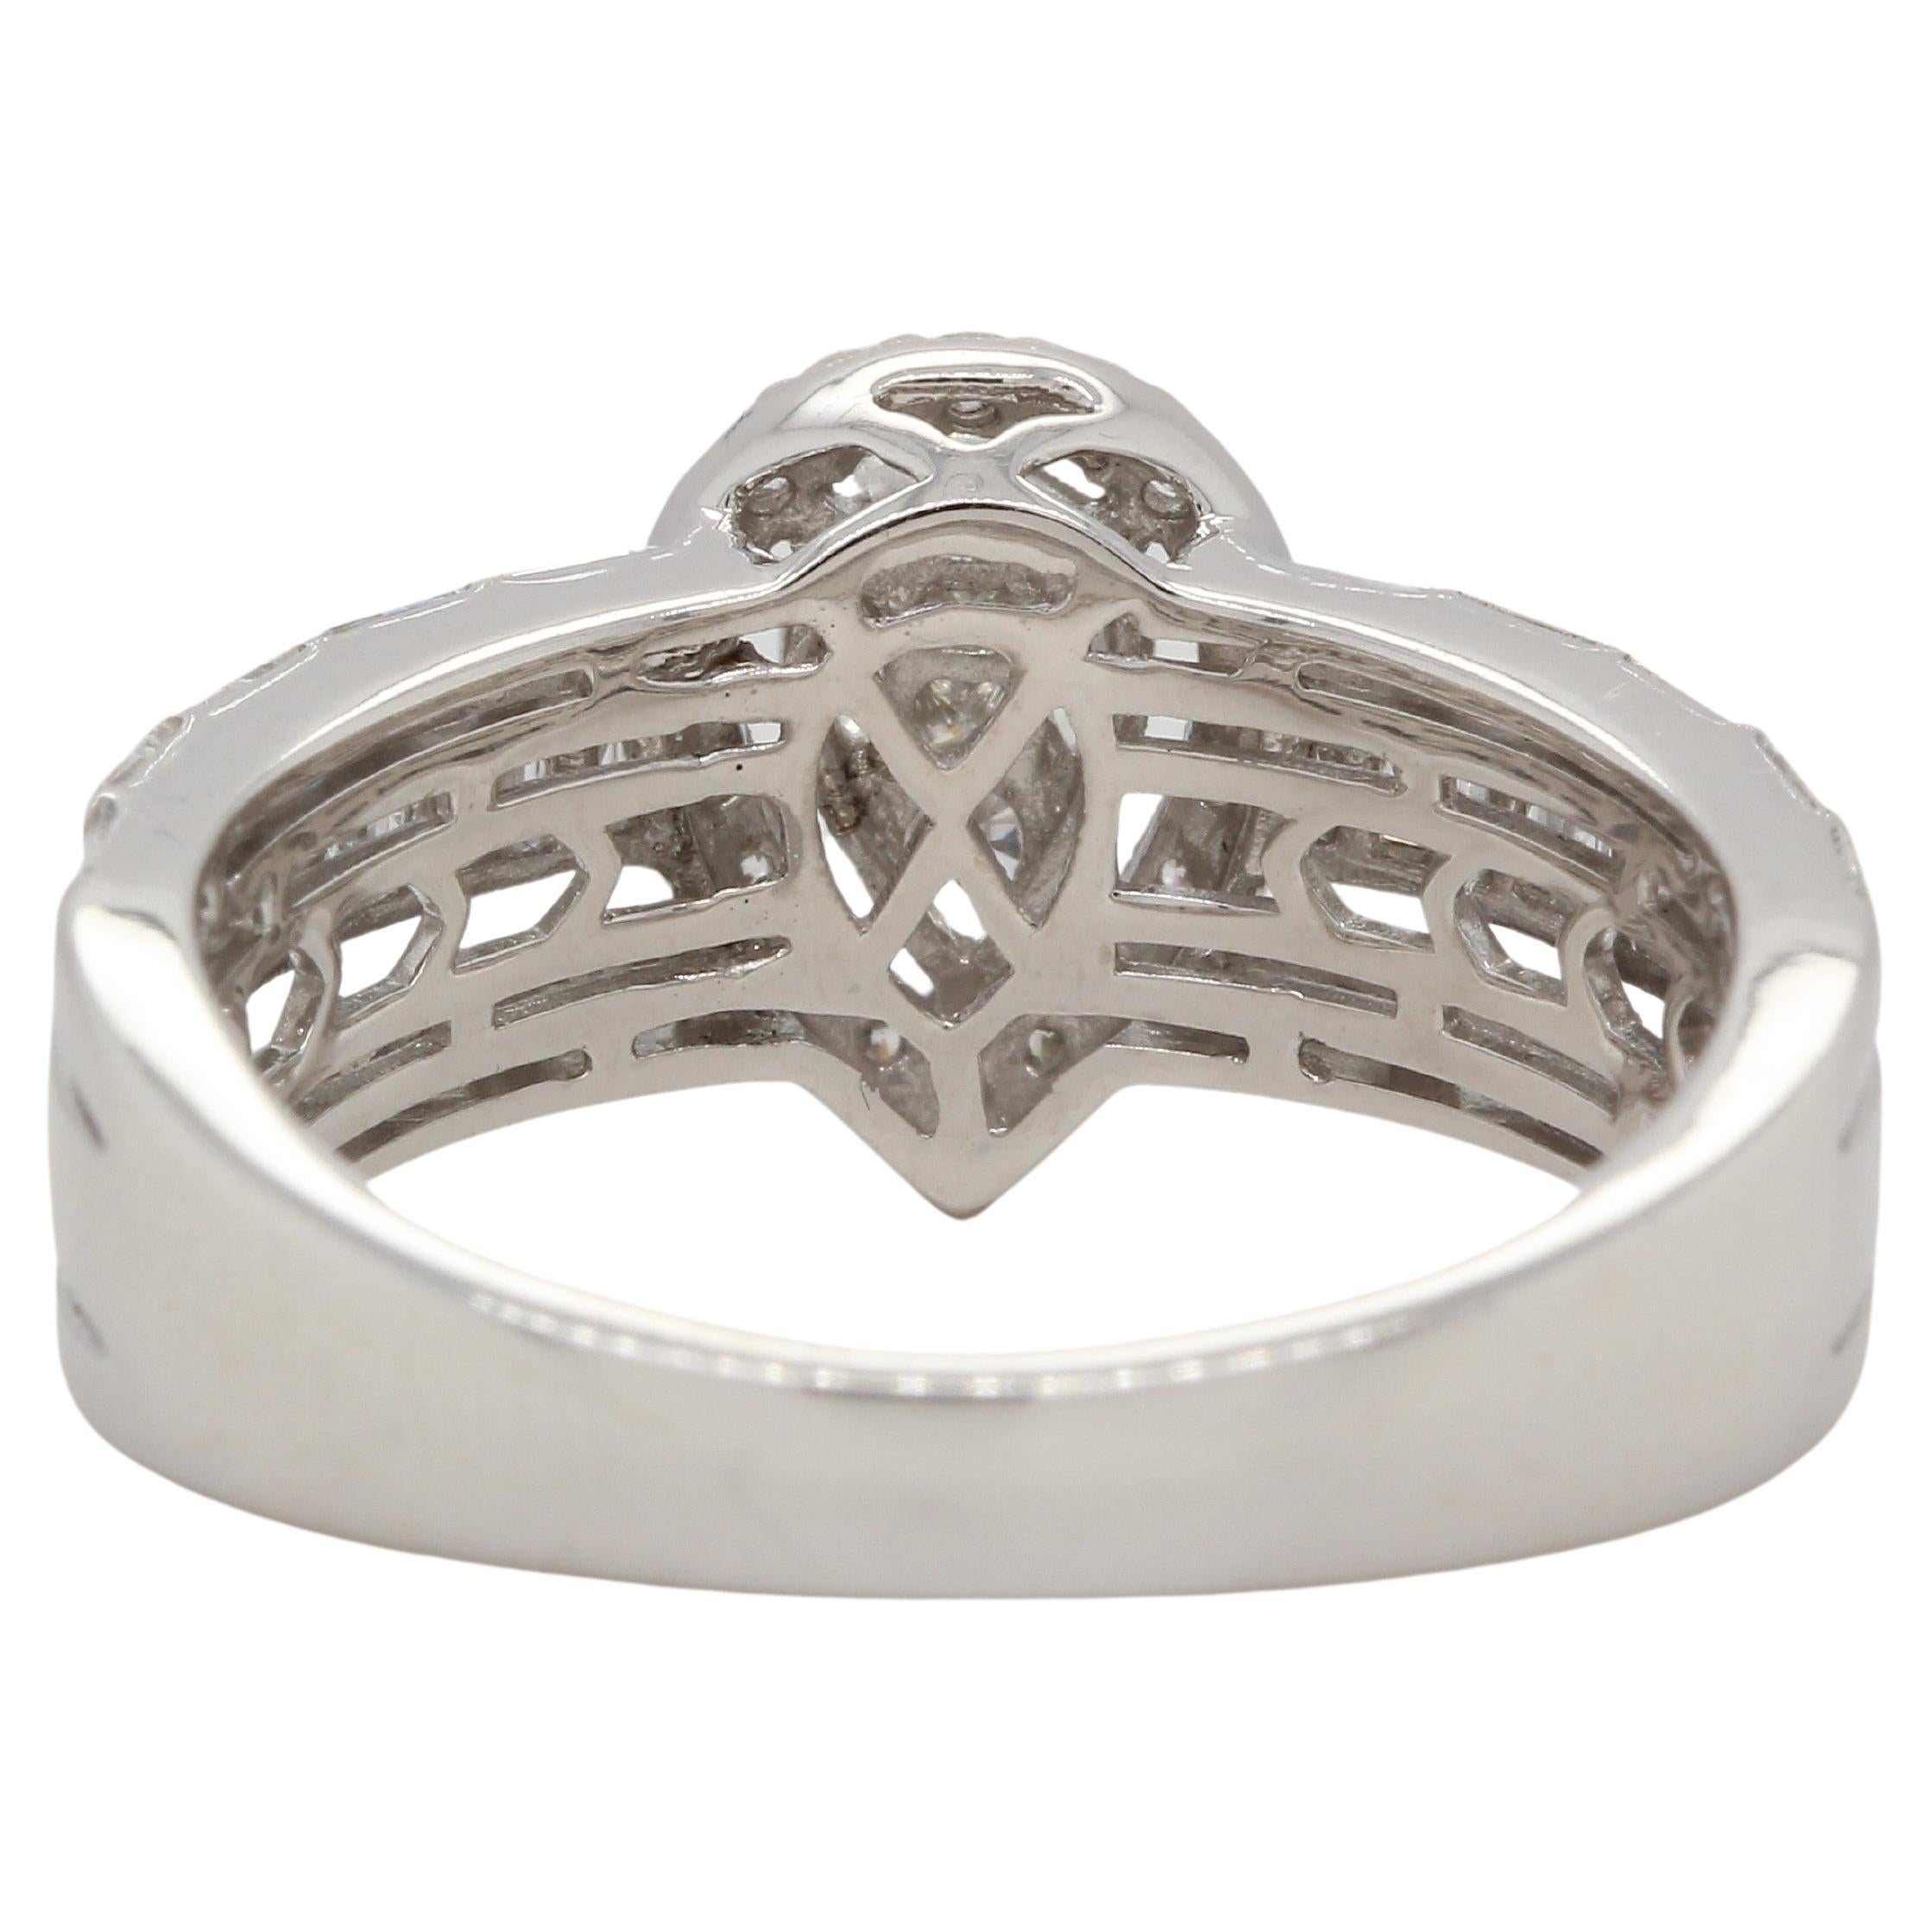 This intricate wedding band from Illusion features a stunning array of white diamonds with 1.00 carat of diamonds. The ring is set with diamond round 0.15 carat, diamond marquise 0.11 carat, diamond tapper 0.62 carat, diamond pear .08 carat and